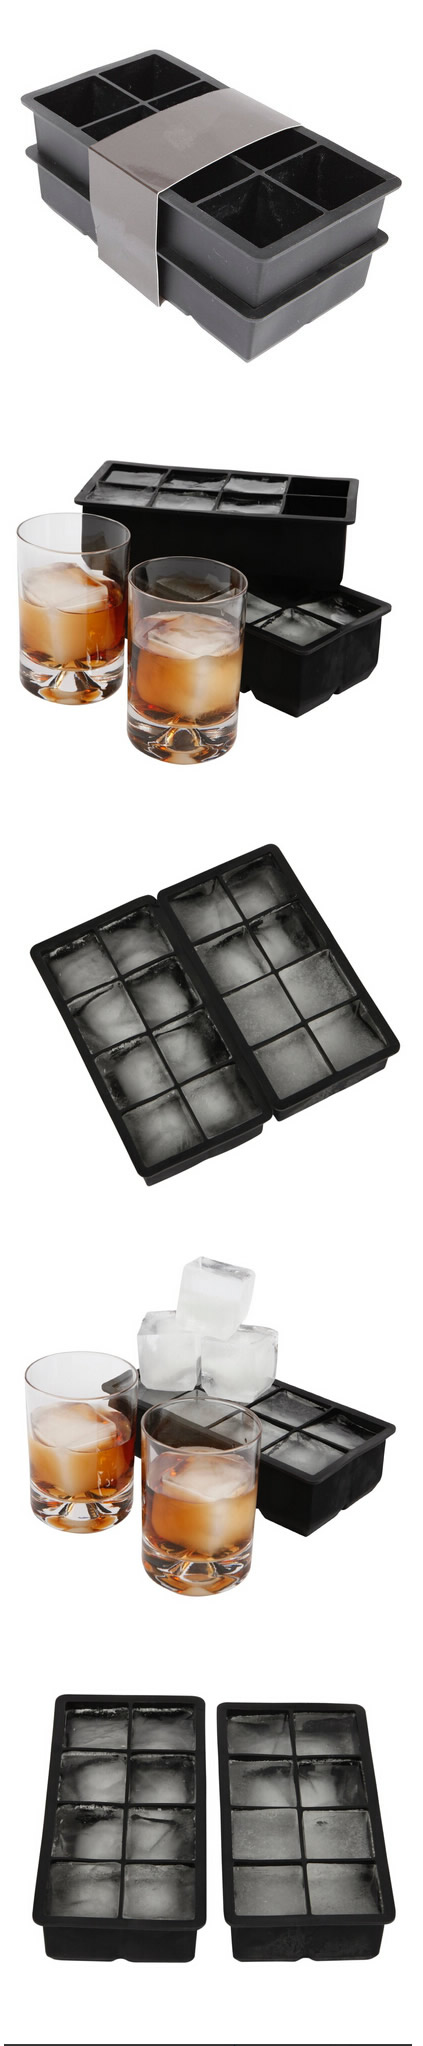 Stainless Steel Ice Cube Tra